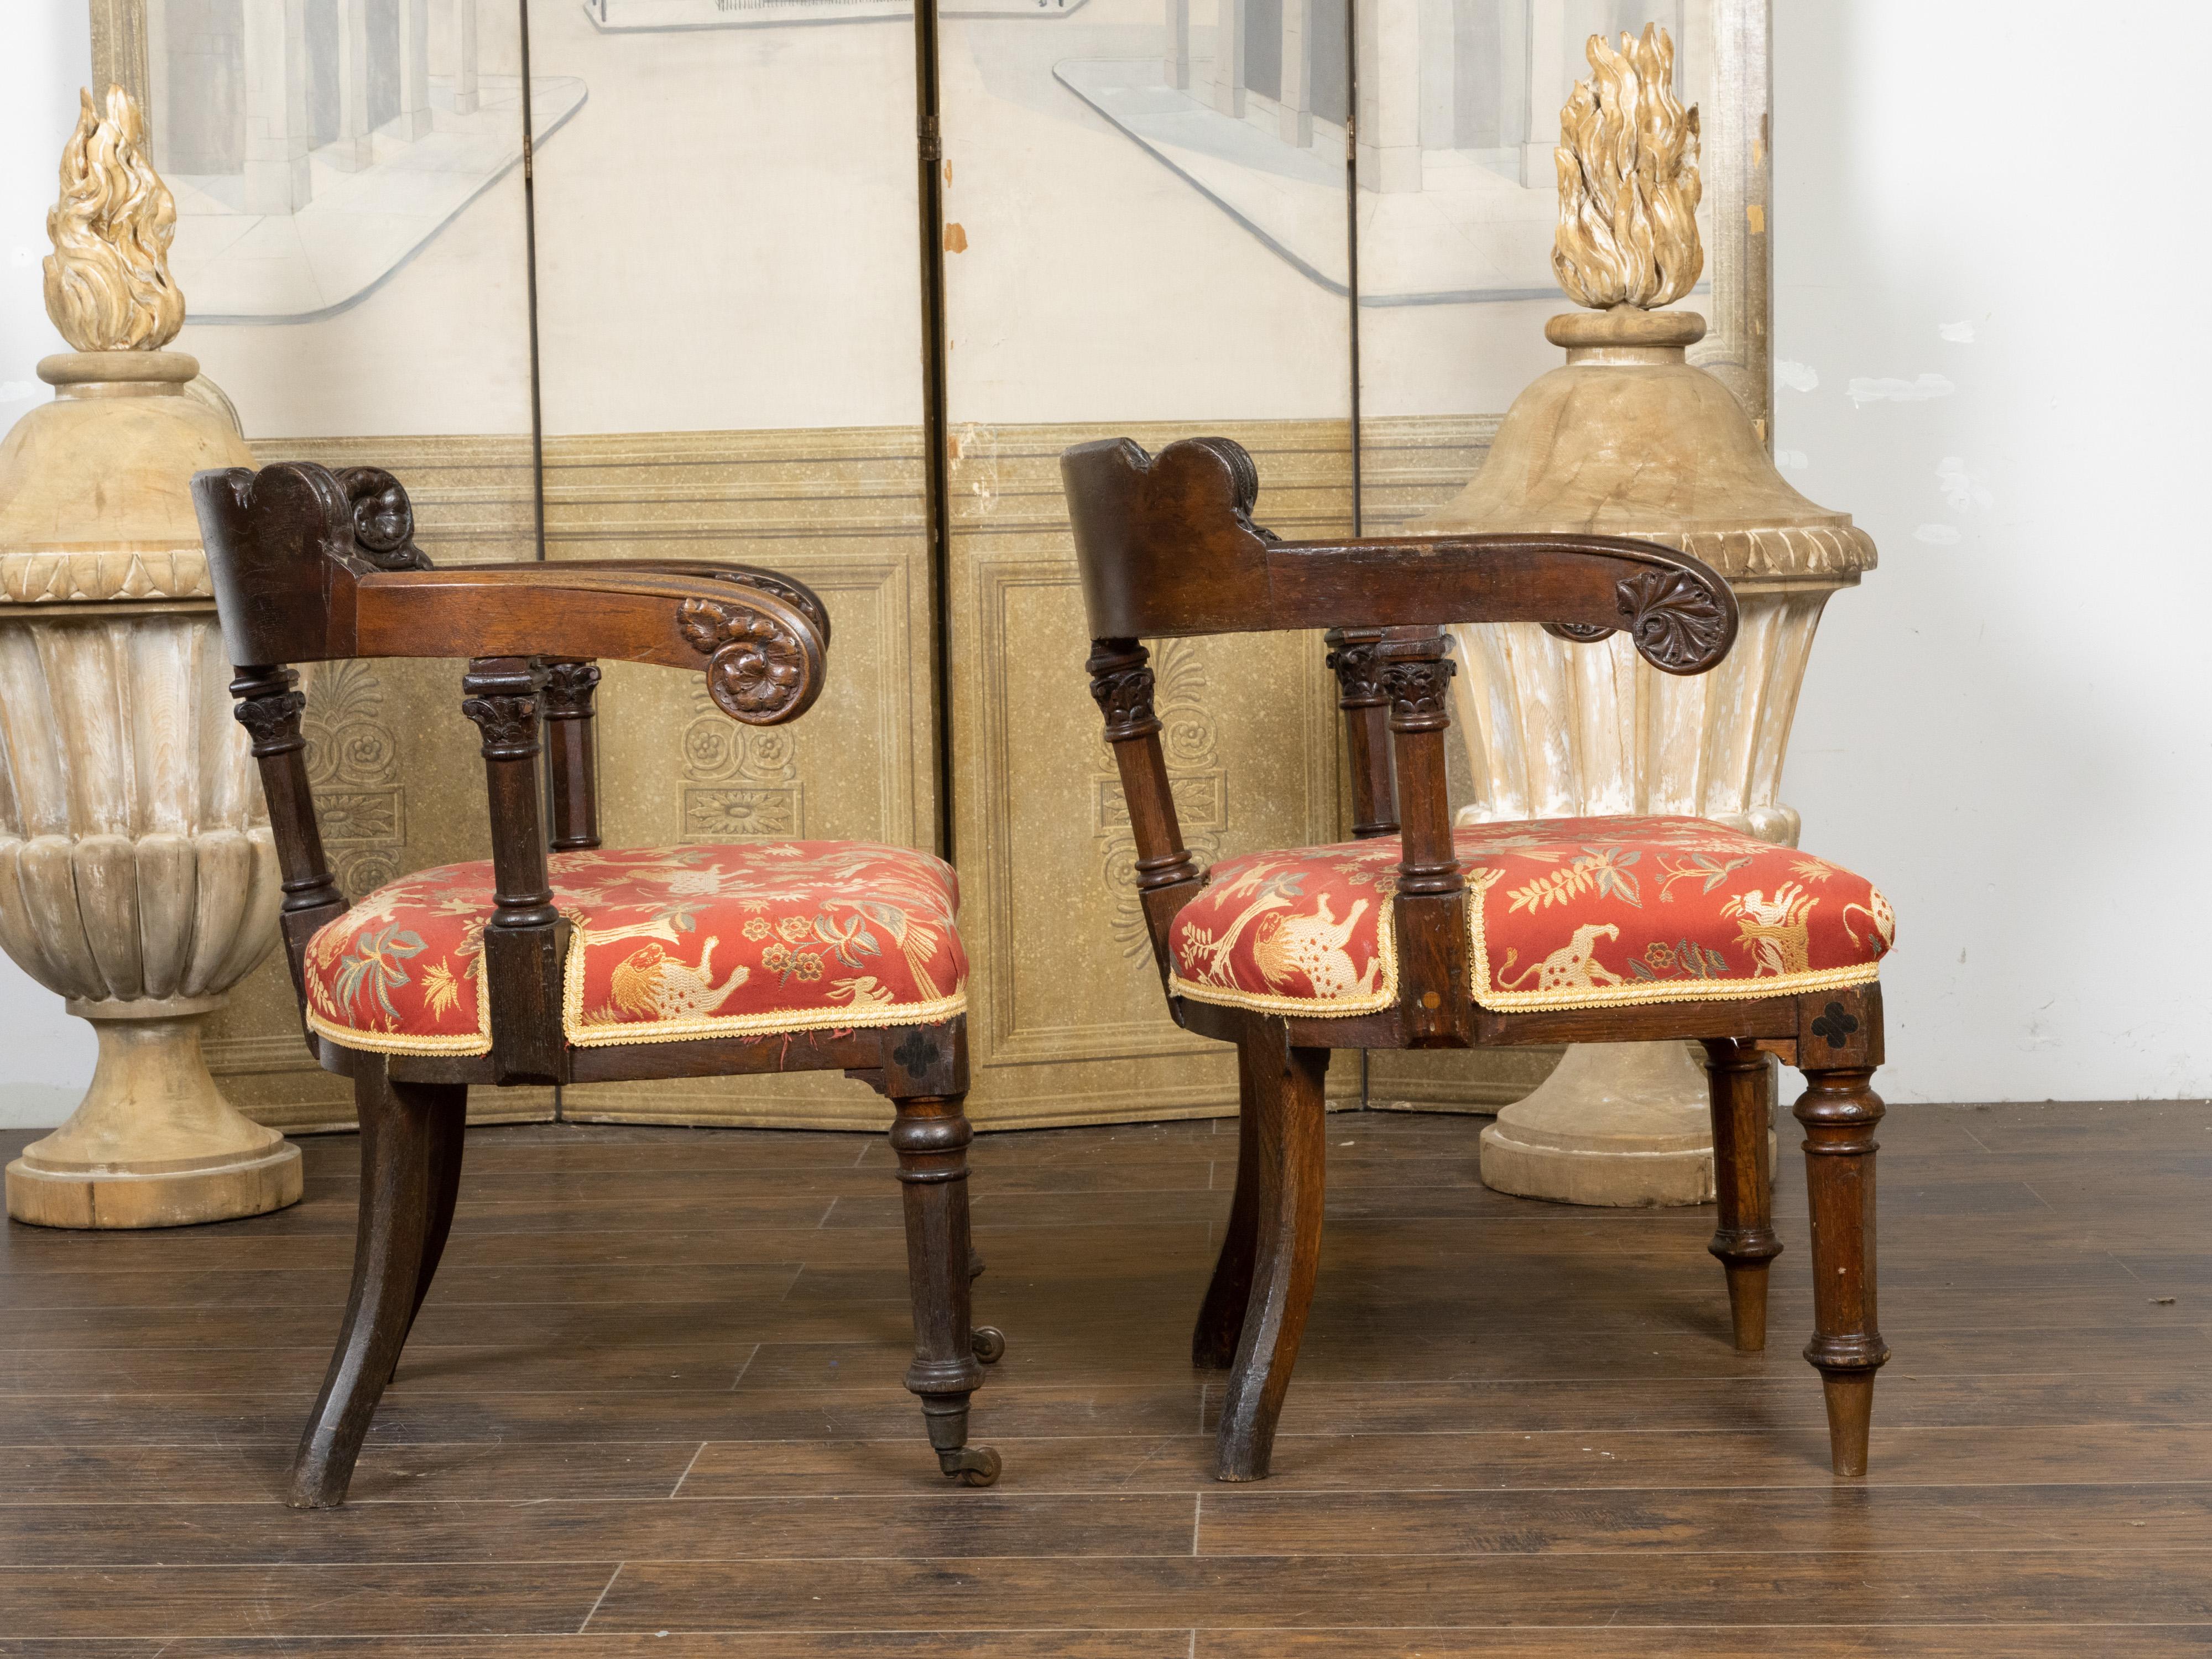 Pair of English Regency Style Carved Oak Klismos Chairs with Horseshoe Backs For Sale 1